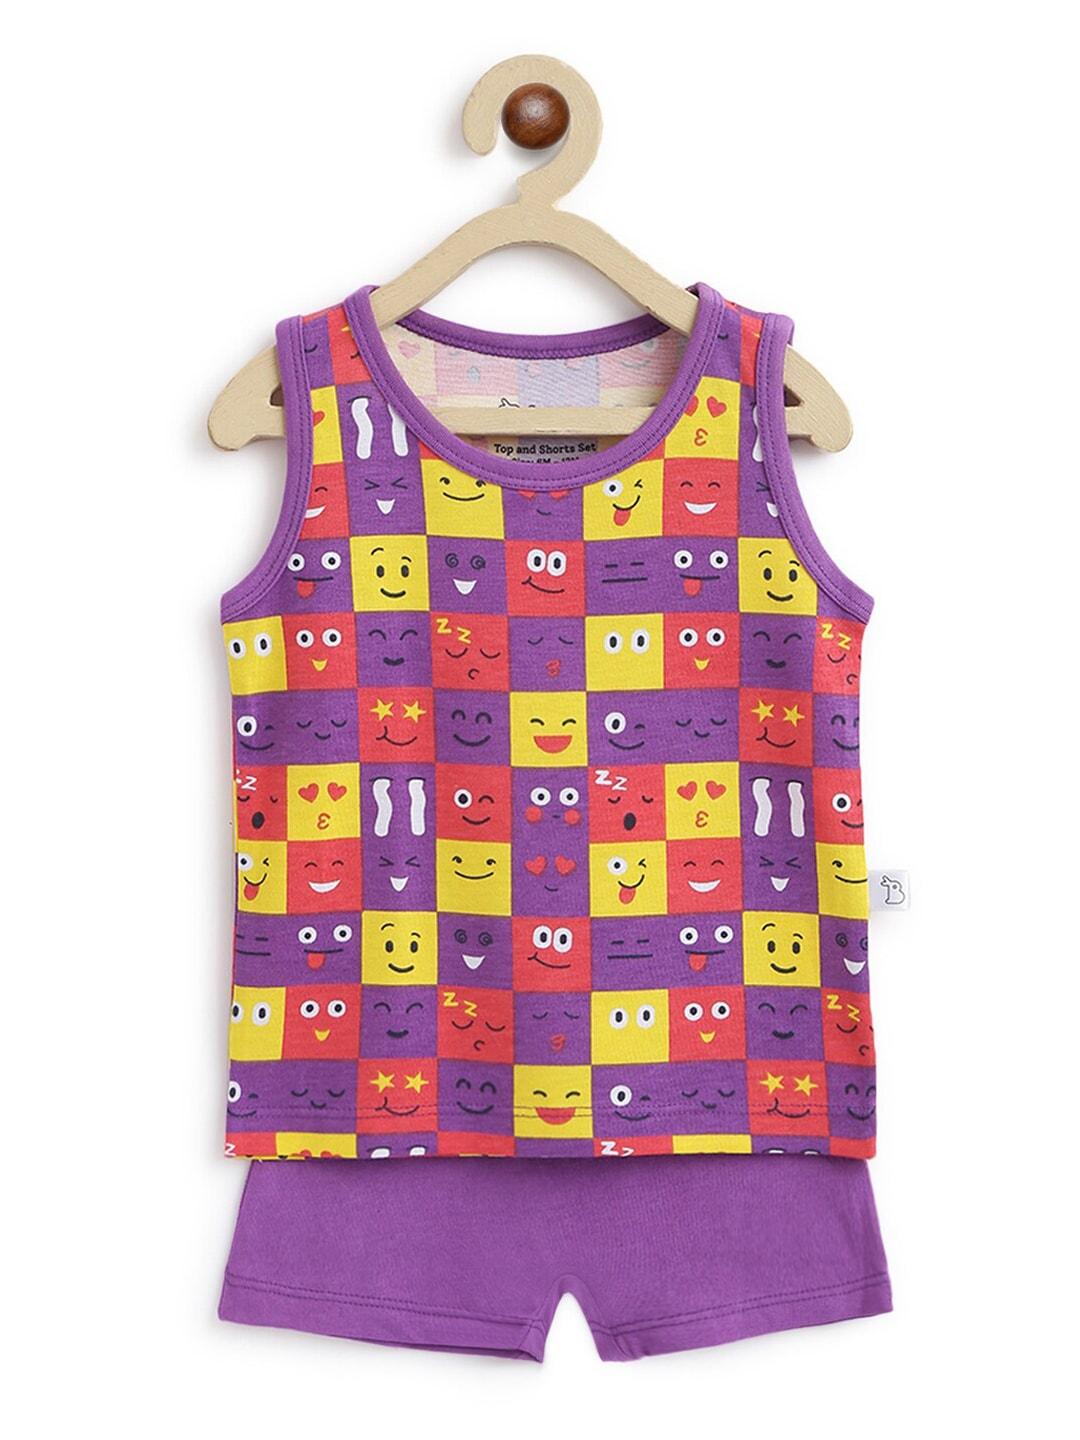 superbottoms-unisex-kids-purple-&-red-printed-t-shirt-with-shorts